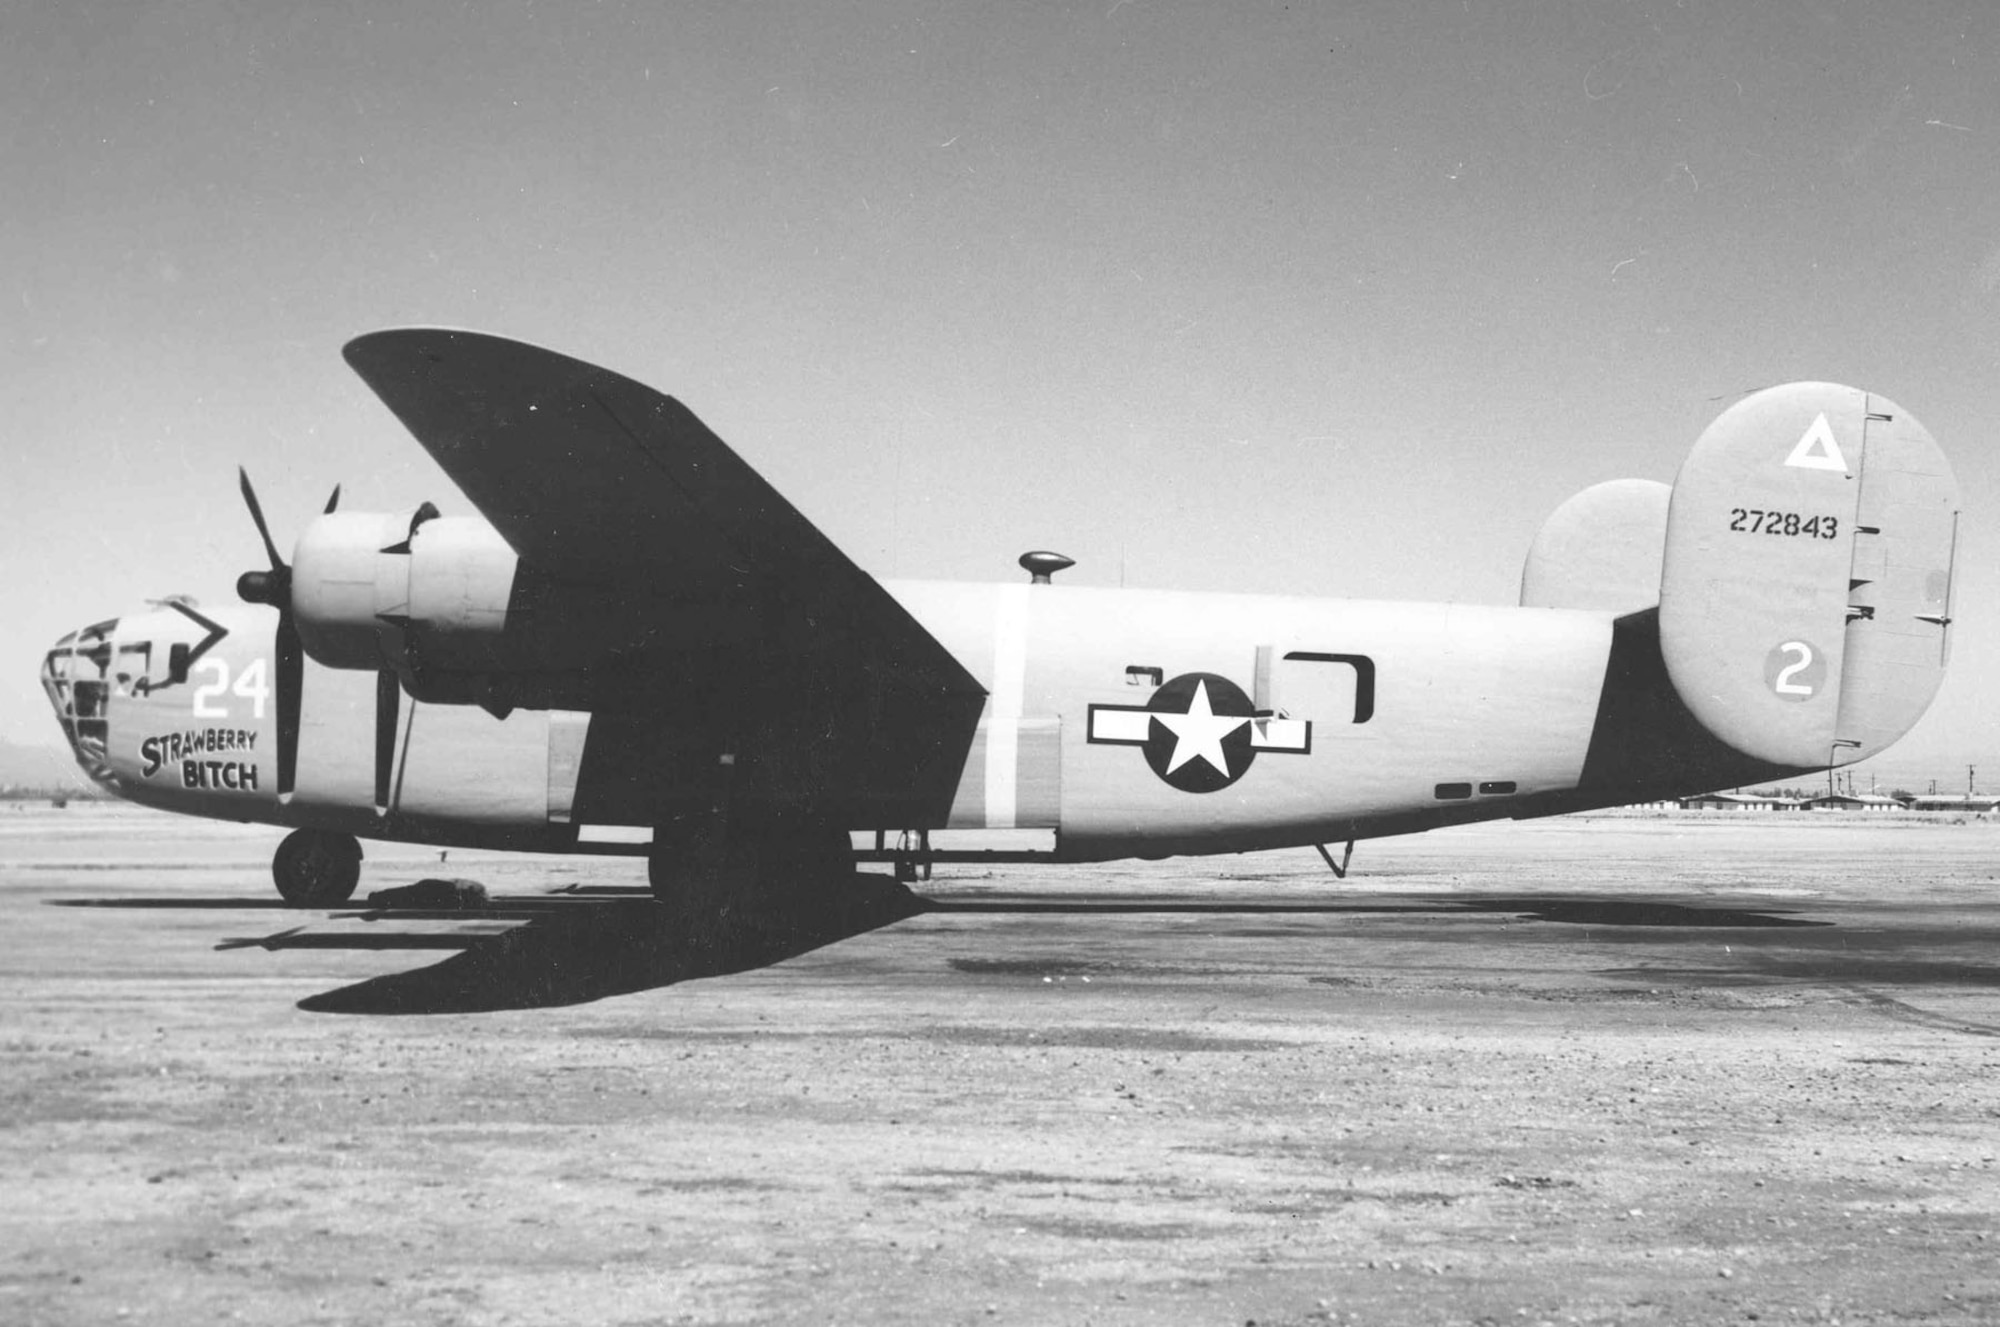 Consolidated B-24D "Strawberry Bitch." (U.S. Air Force photo)